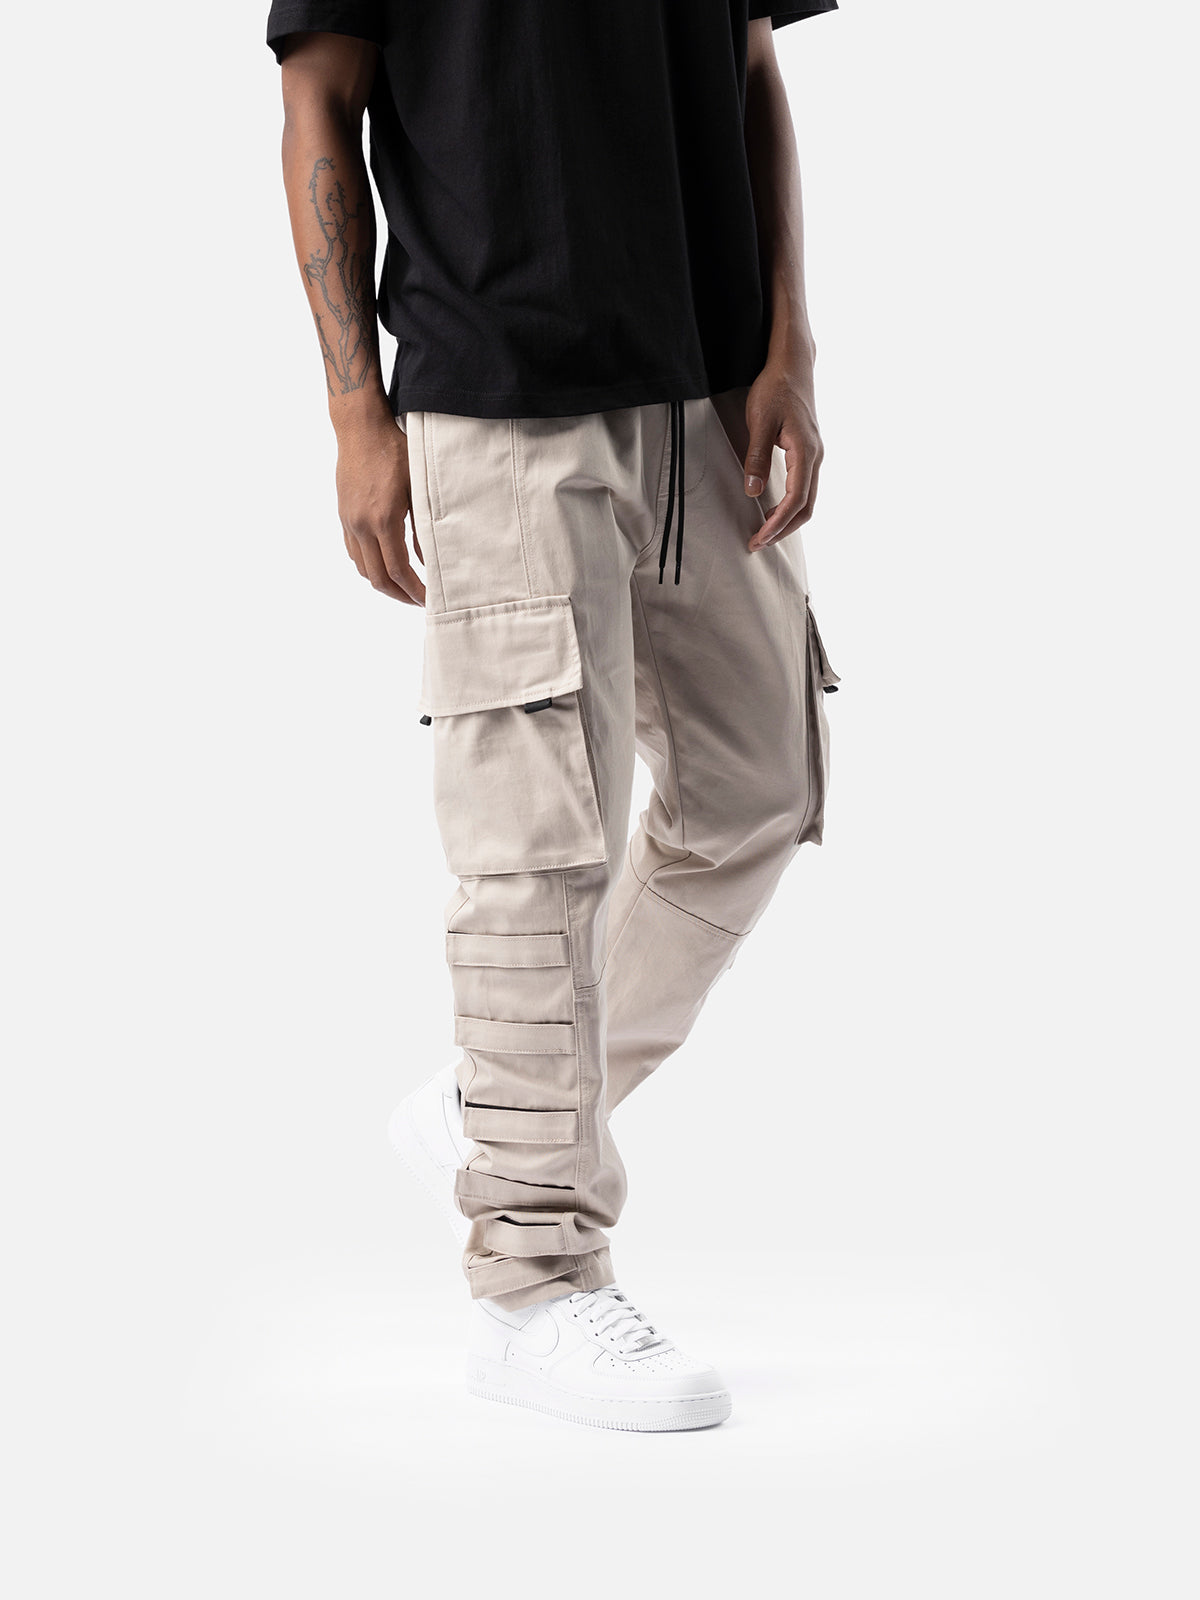 ZW COLLECTION CARGO PANTS - taupe brown